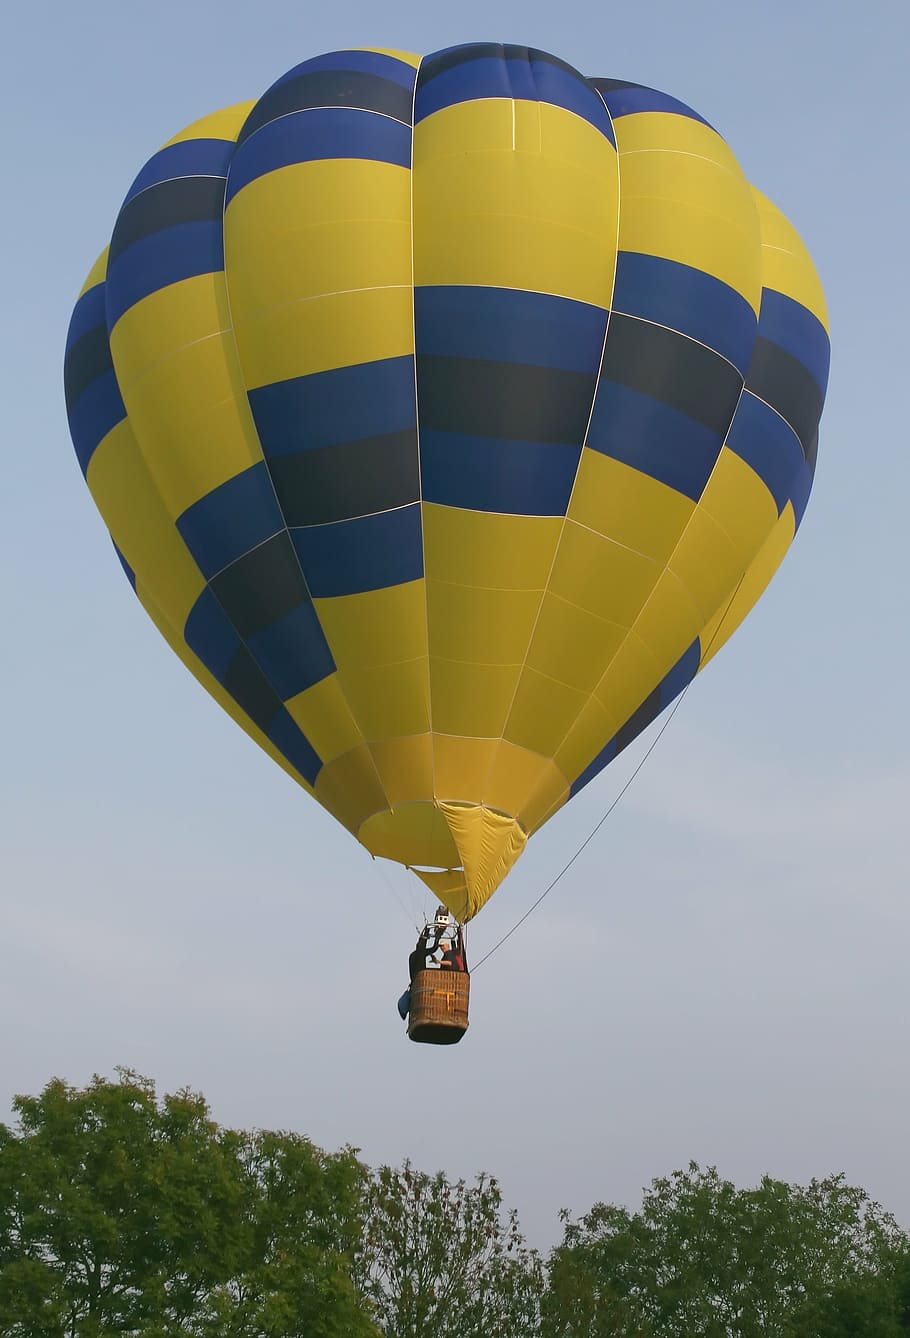 yellow and blue hot air balloon on sky, aerospace, aircraft, ascend